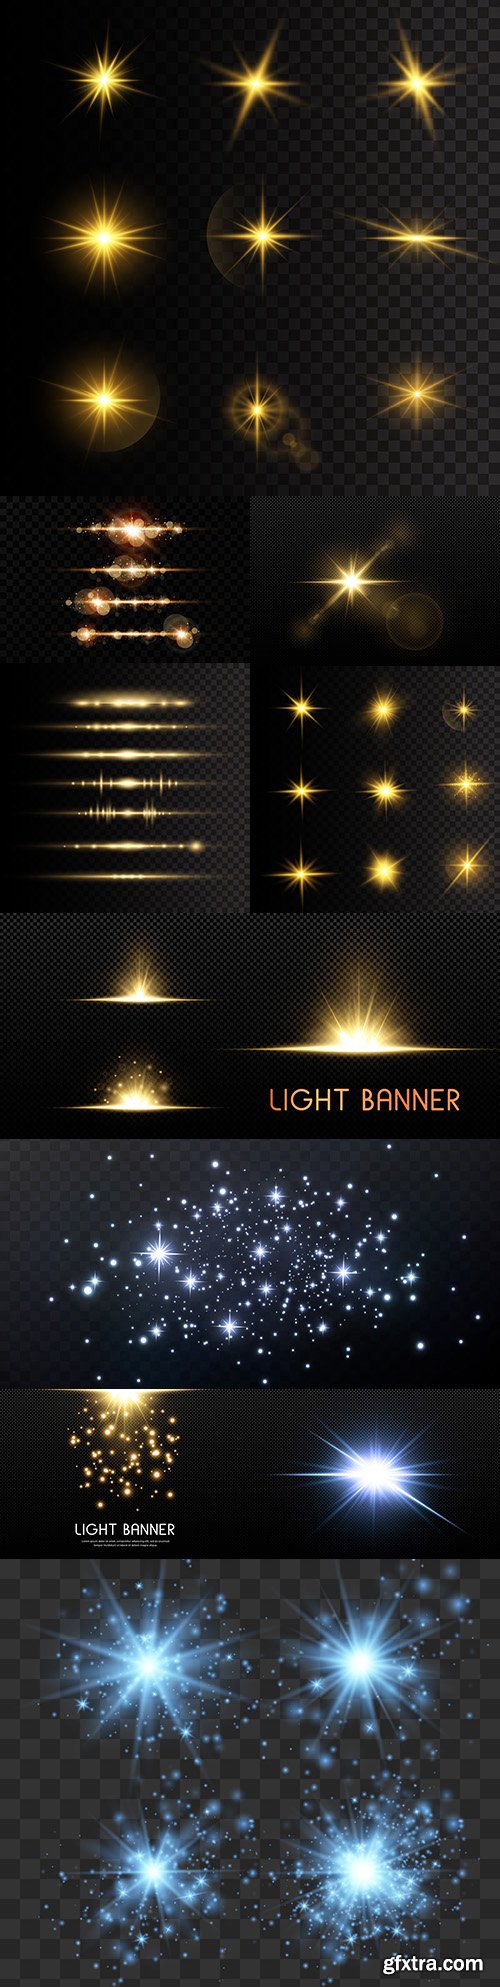 Bright lighting effects collection design illustrations 30
